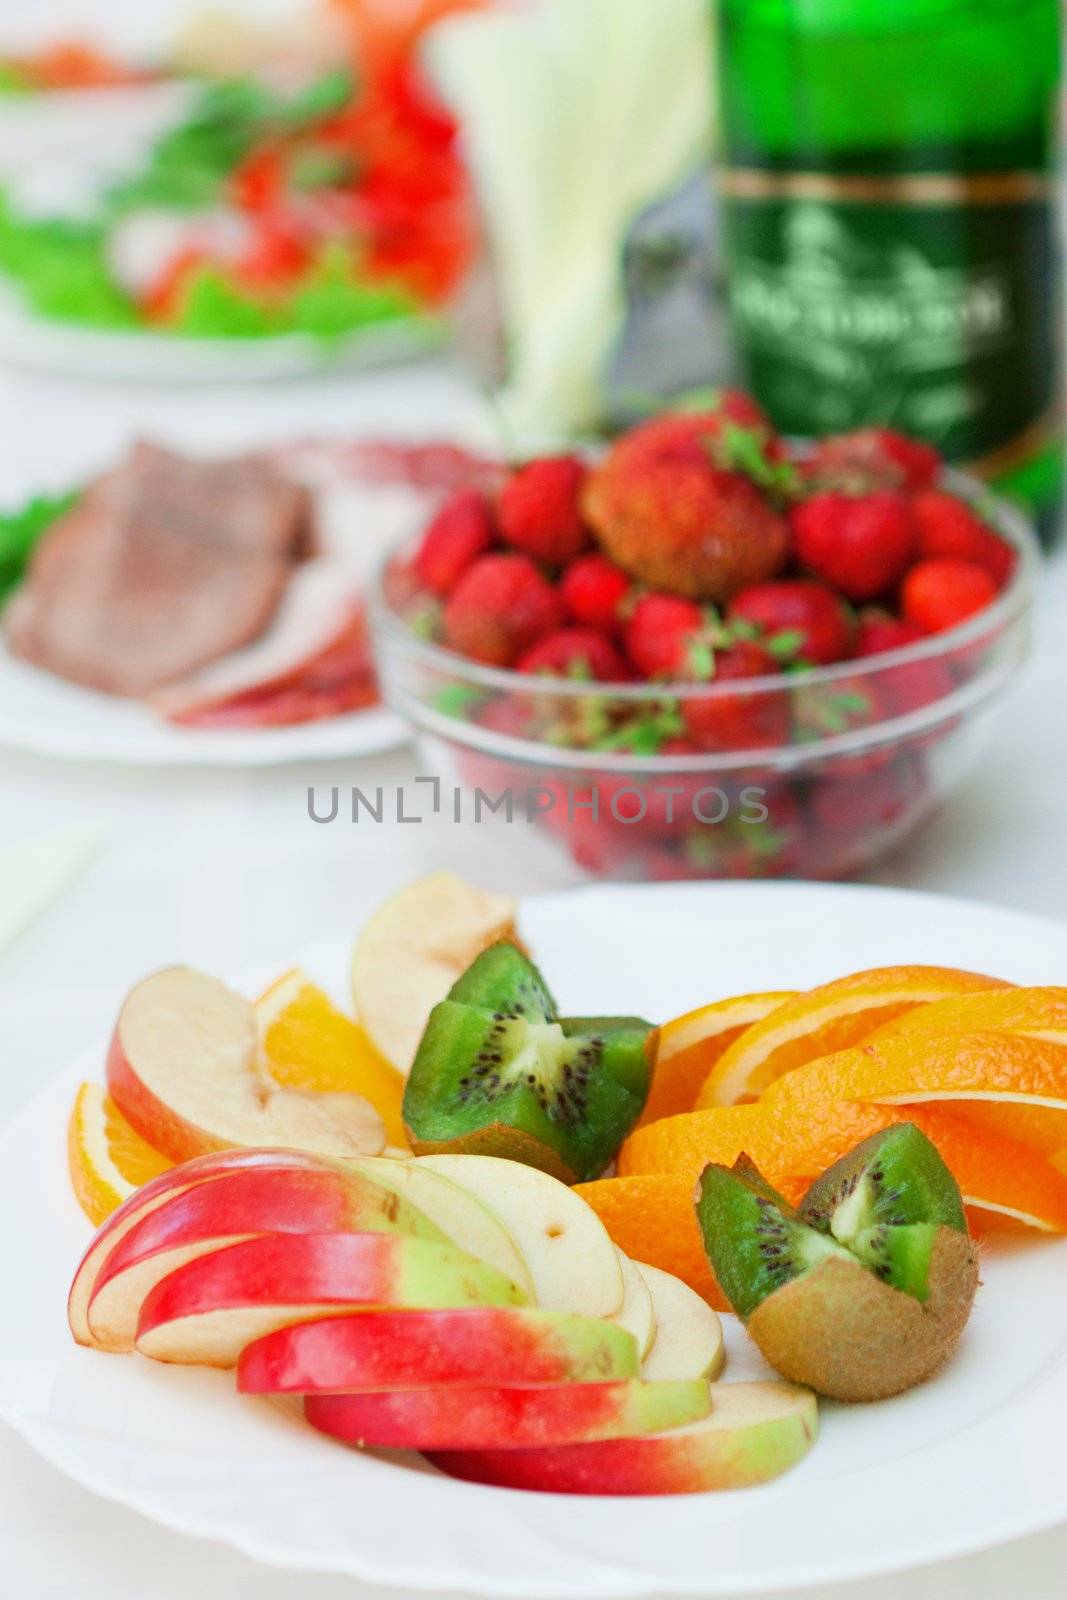 cutting of fruit on a light background with other ingredients.